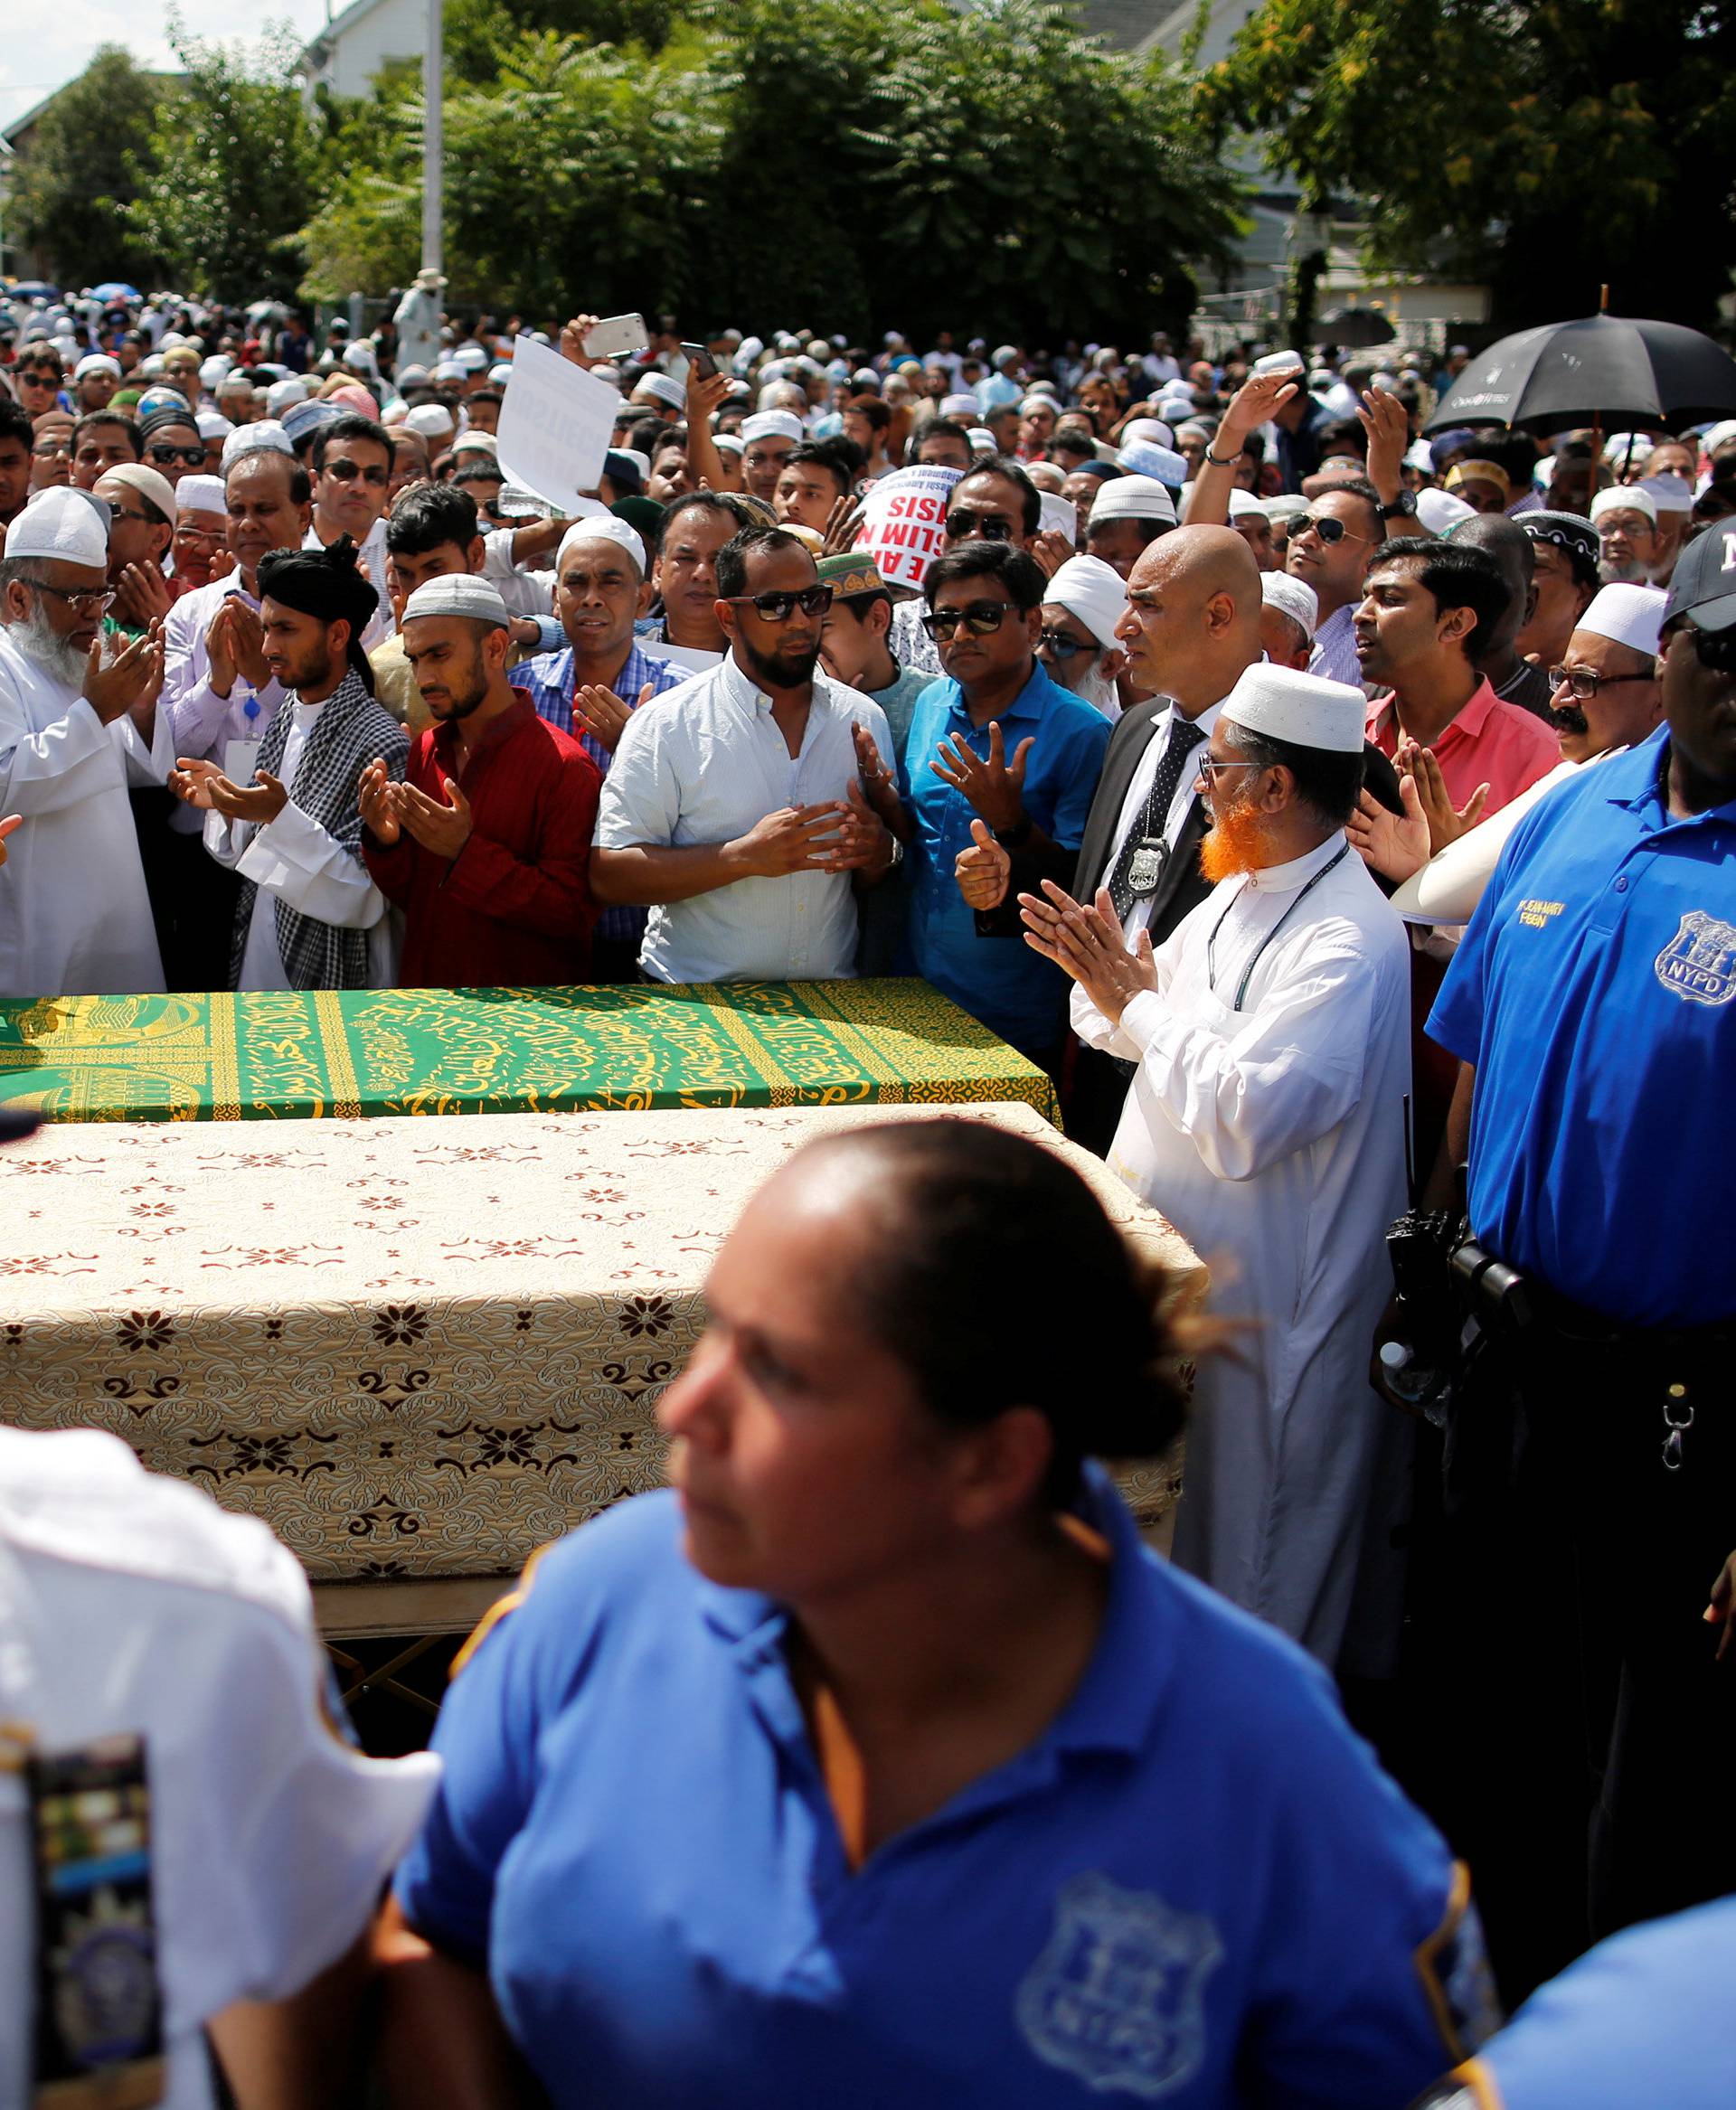 Community members pray next to the coffins during the funeral service of Akonjee, and Uddin in the Queens borough of New York City